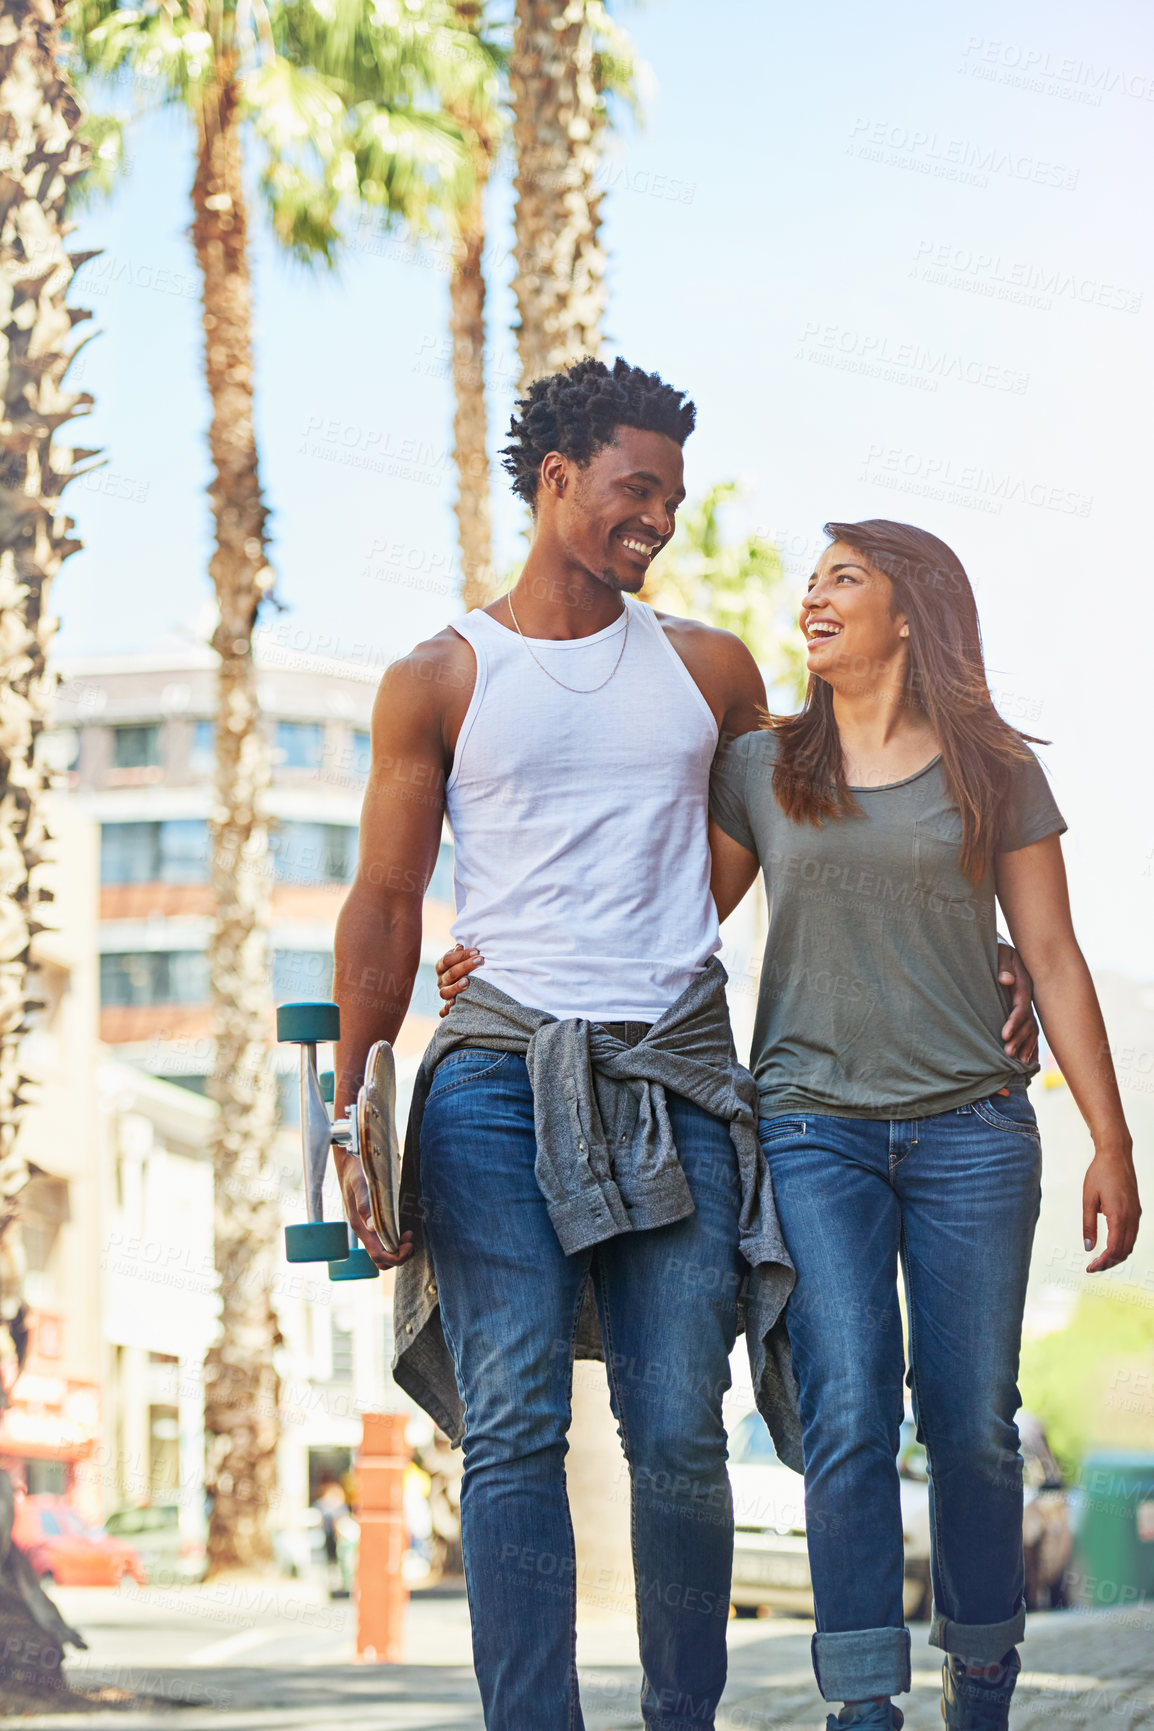 Buy stock photo Shot of a happy young couple going for a walk through the city